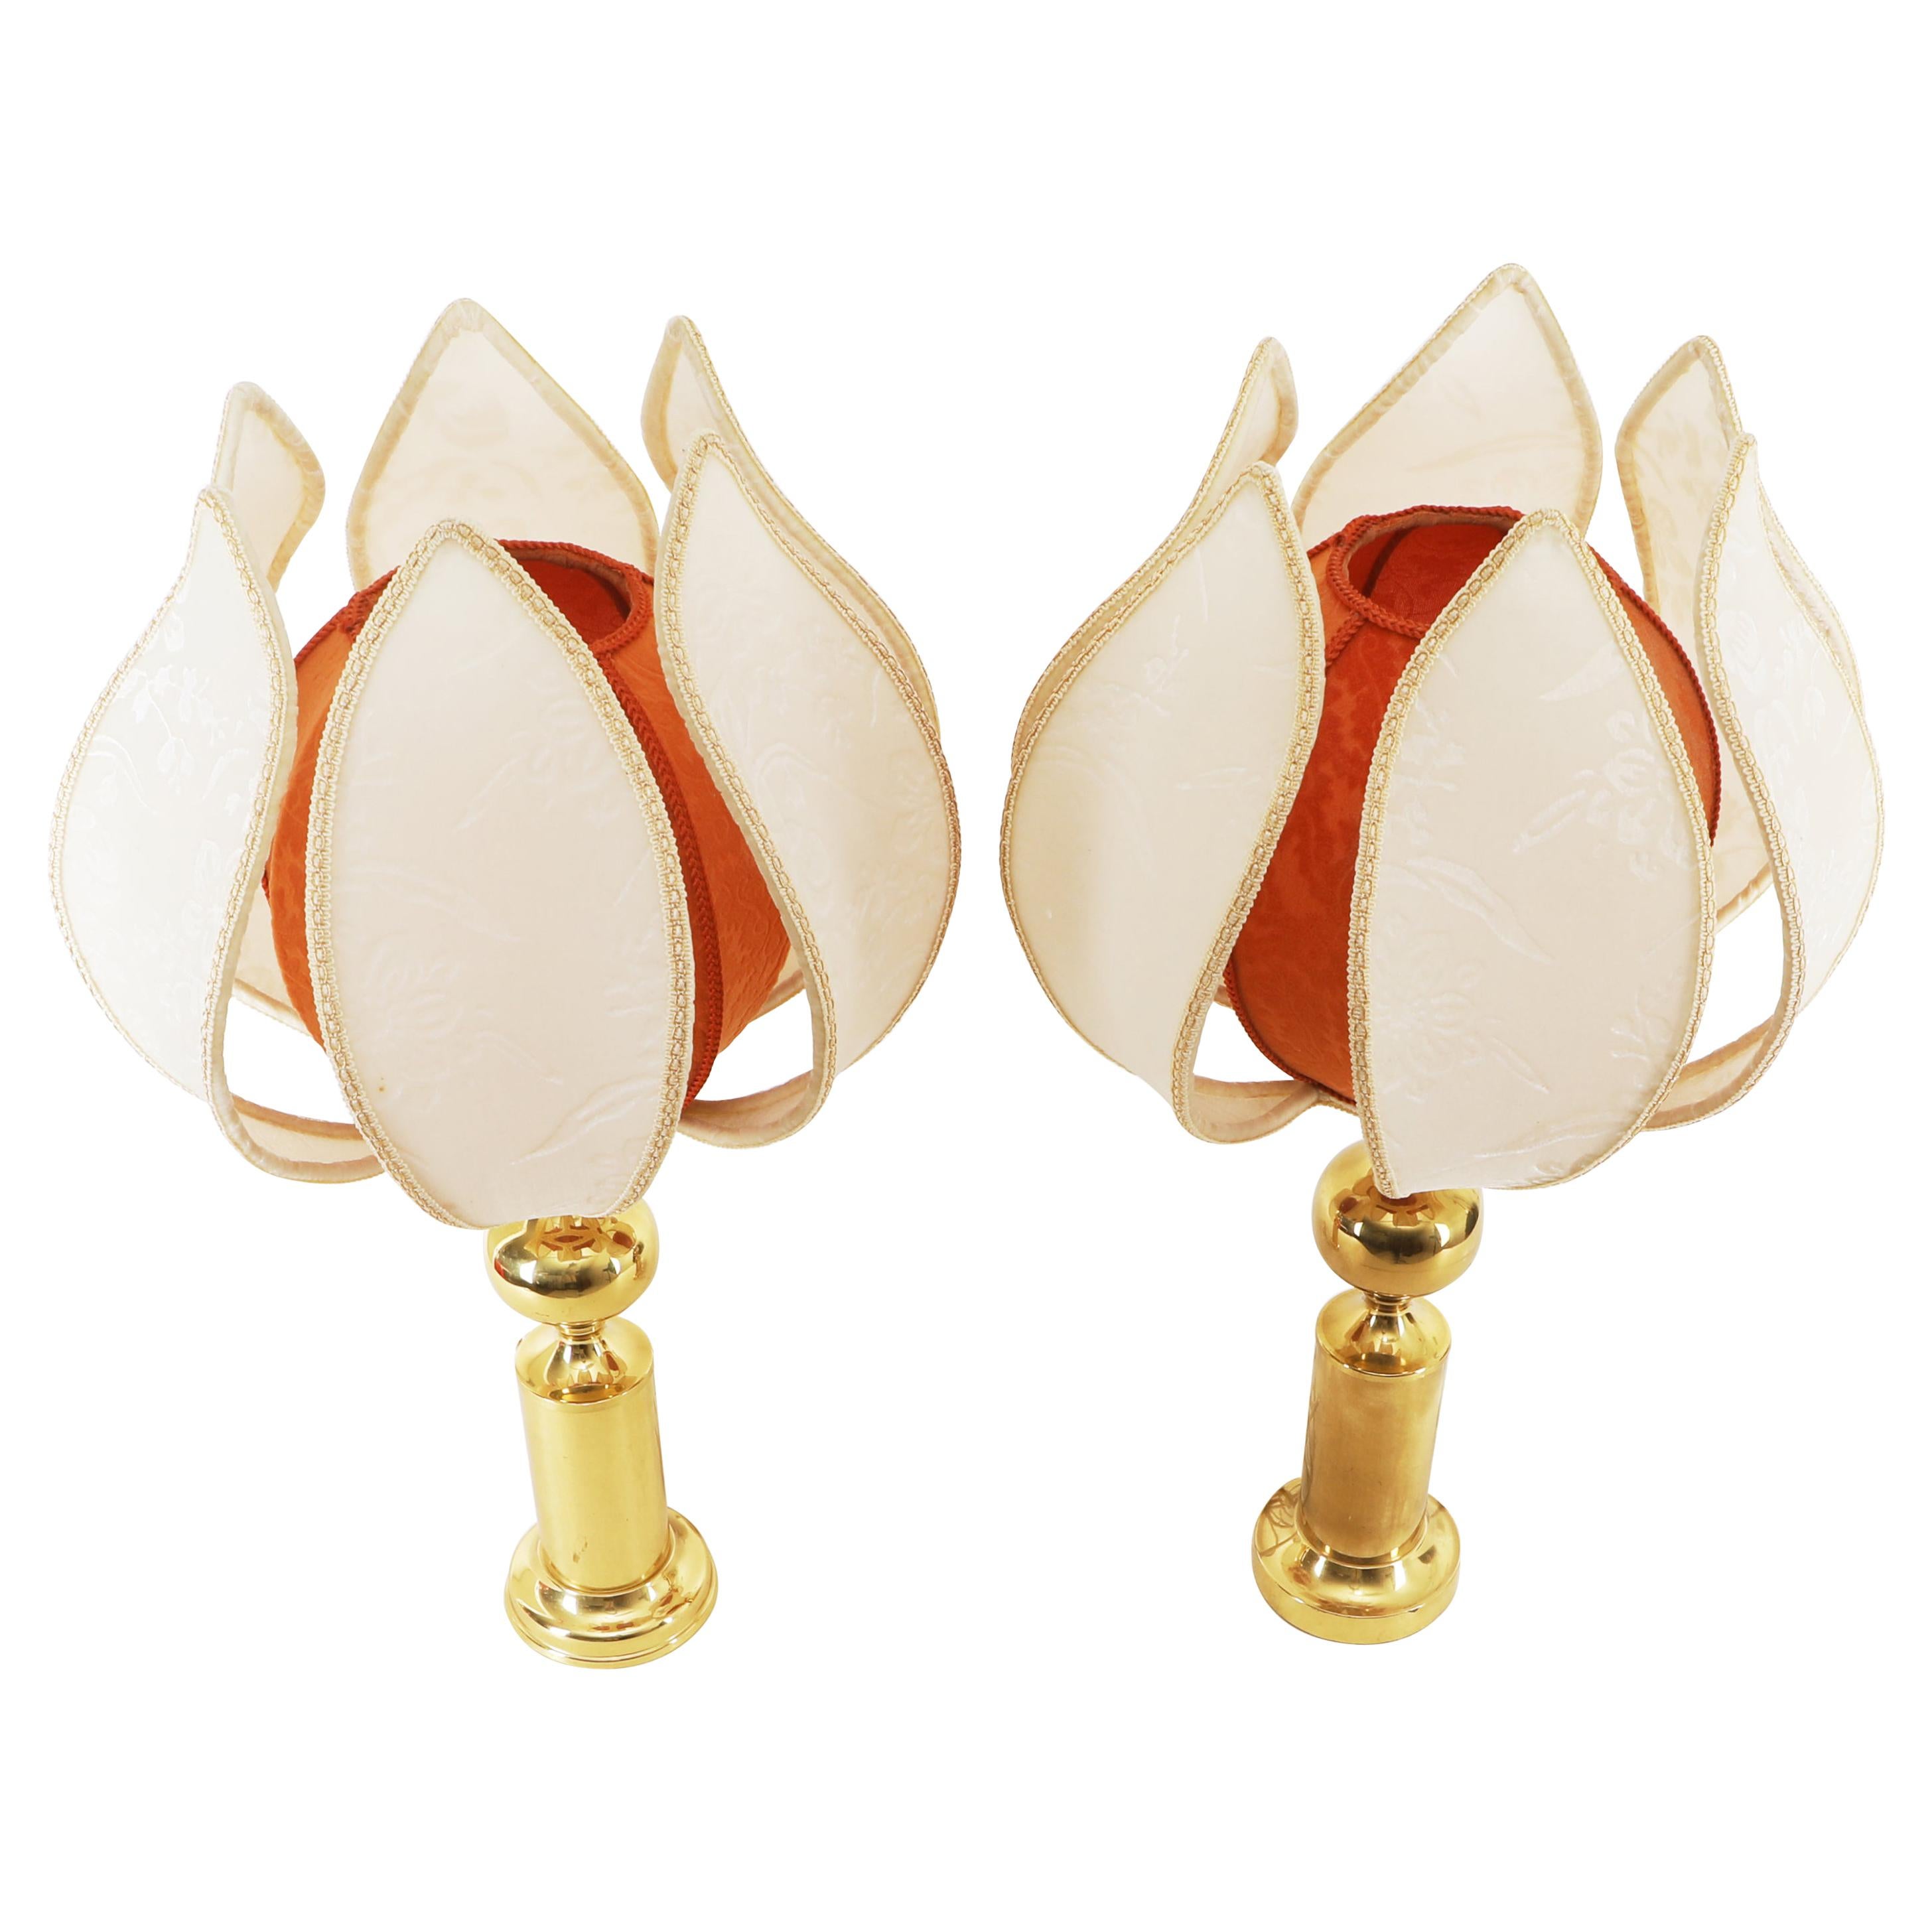 Pair of Mid-Century Tulip Shaped Table Lamps For Sale